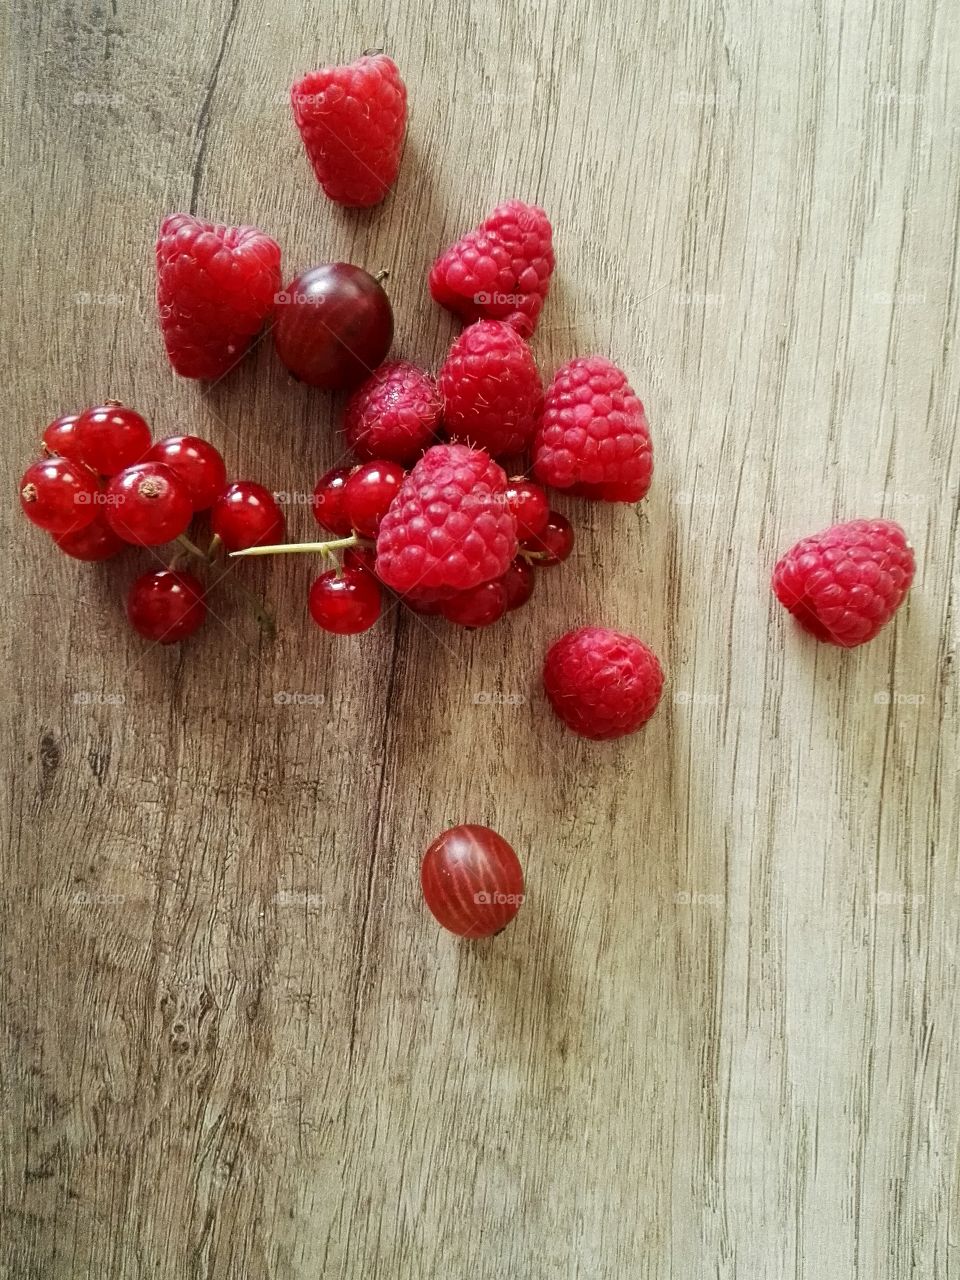 berries on wooden table